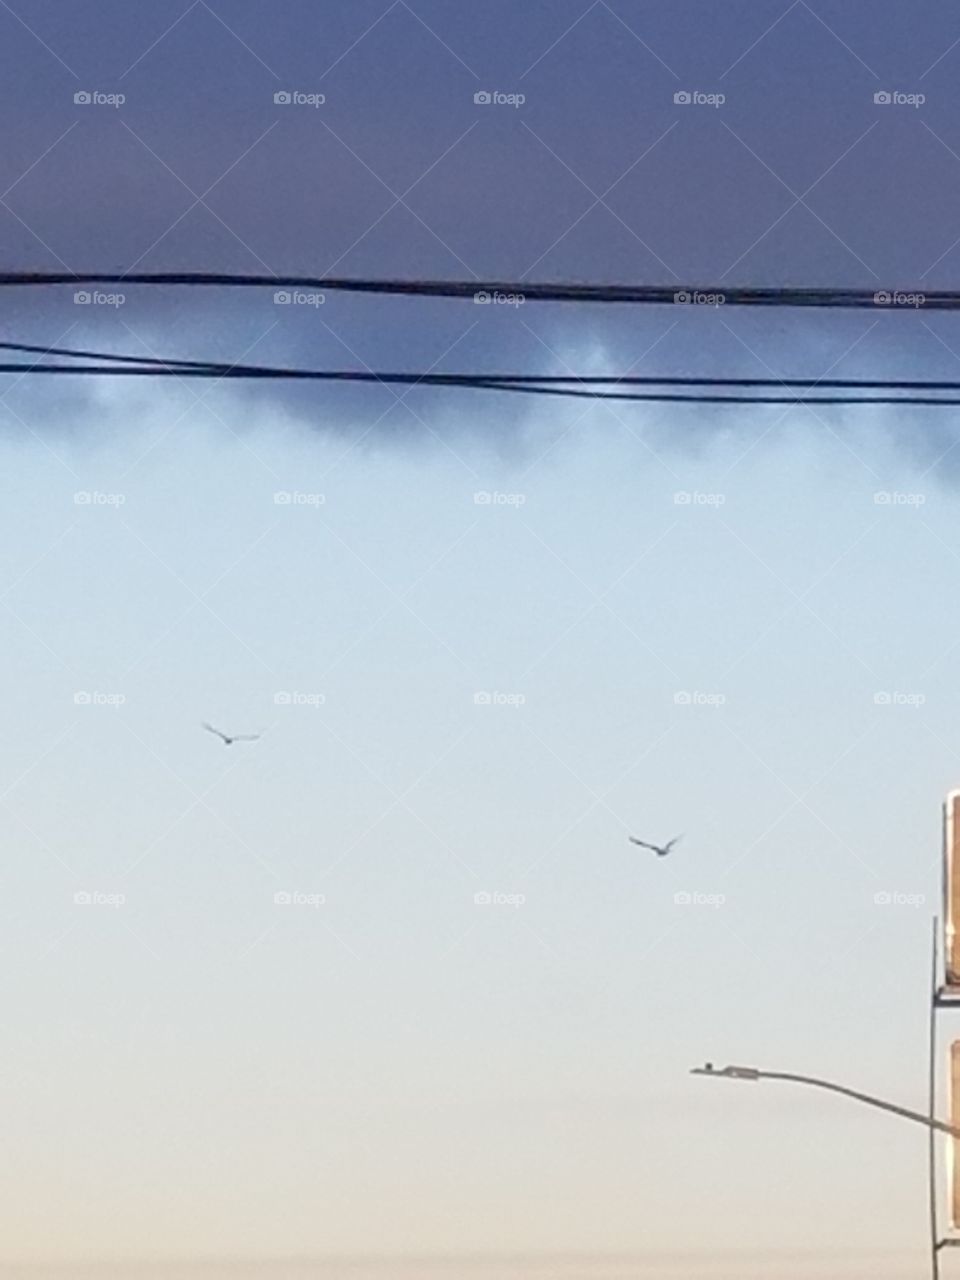 birds flying to the wires